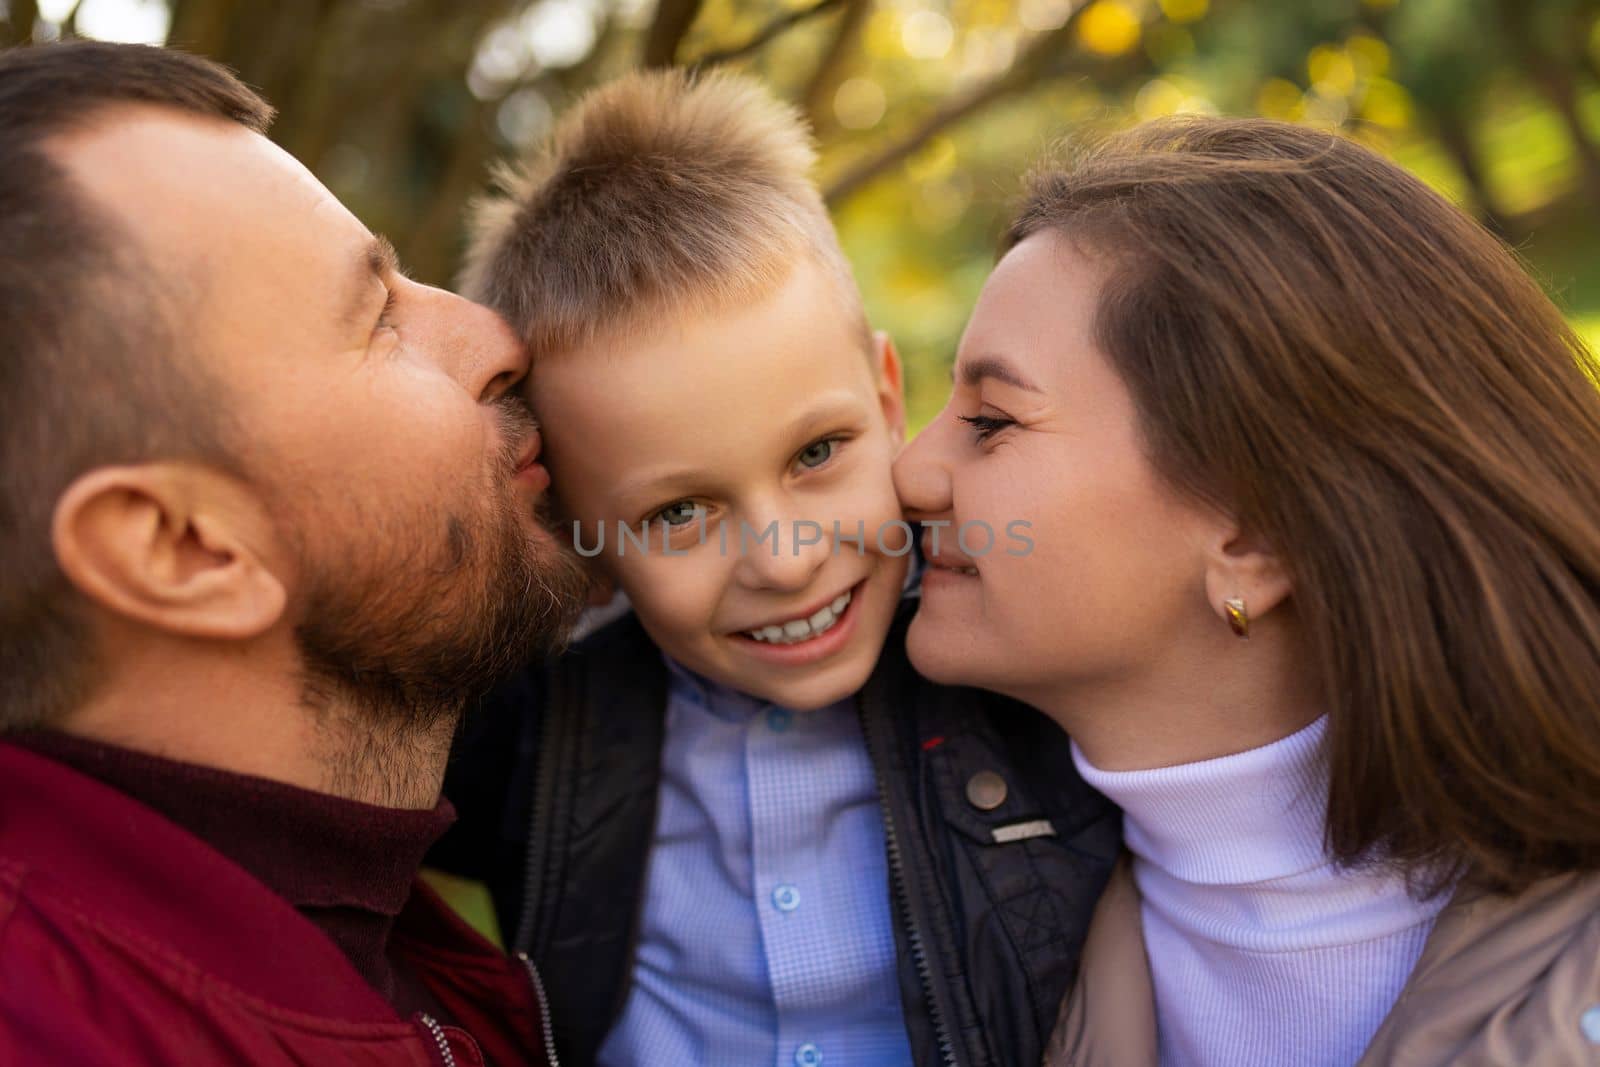 mom and dad kissing a child boy between themselves, close-up portrait by TRMK